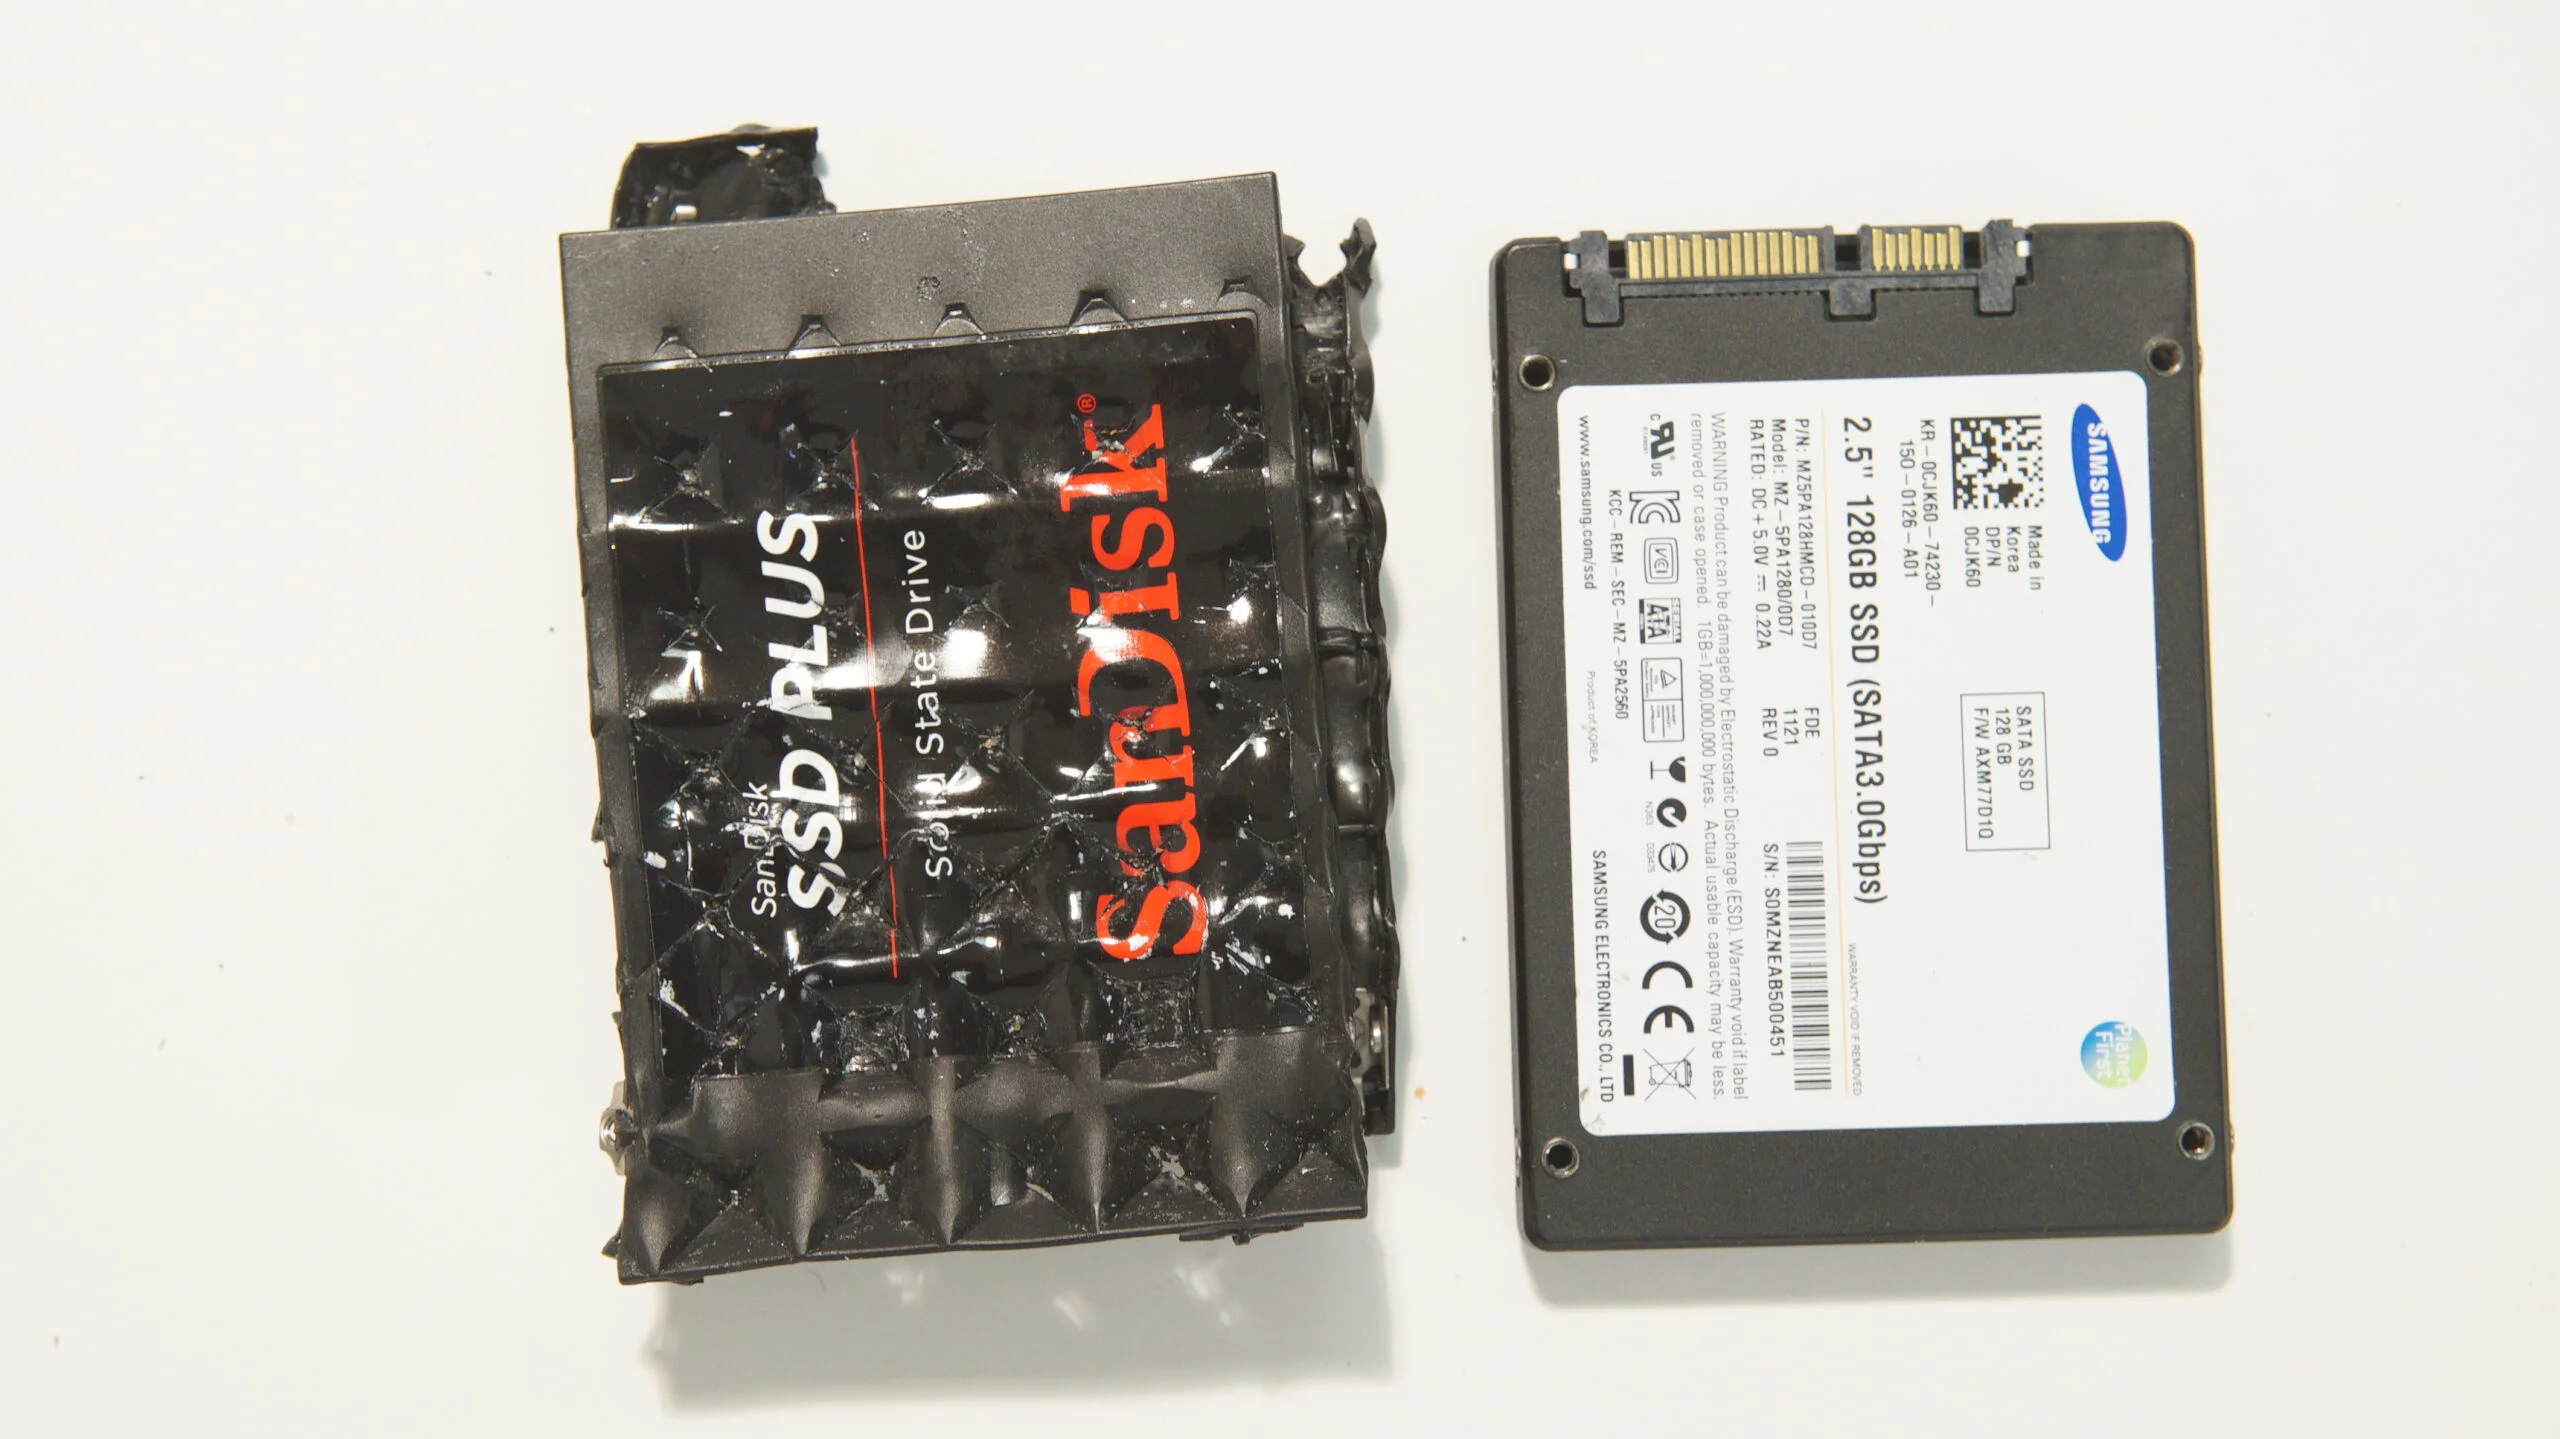 How to Destroy SSD Drives (And Does Degaussing Work on Them?)